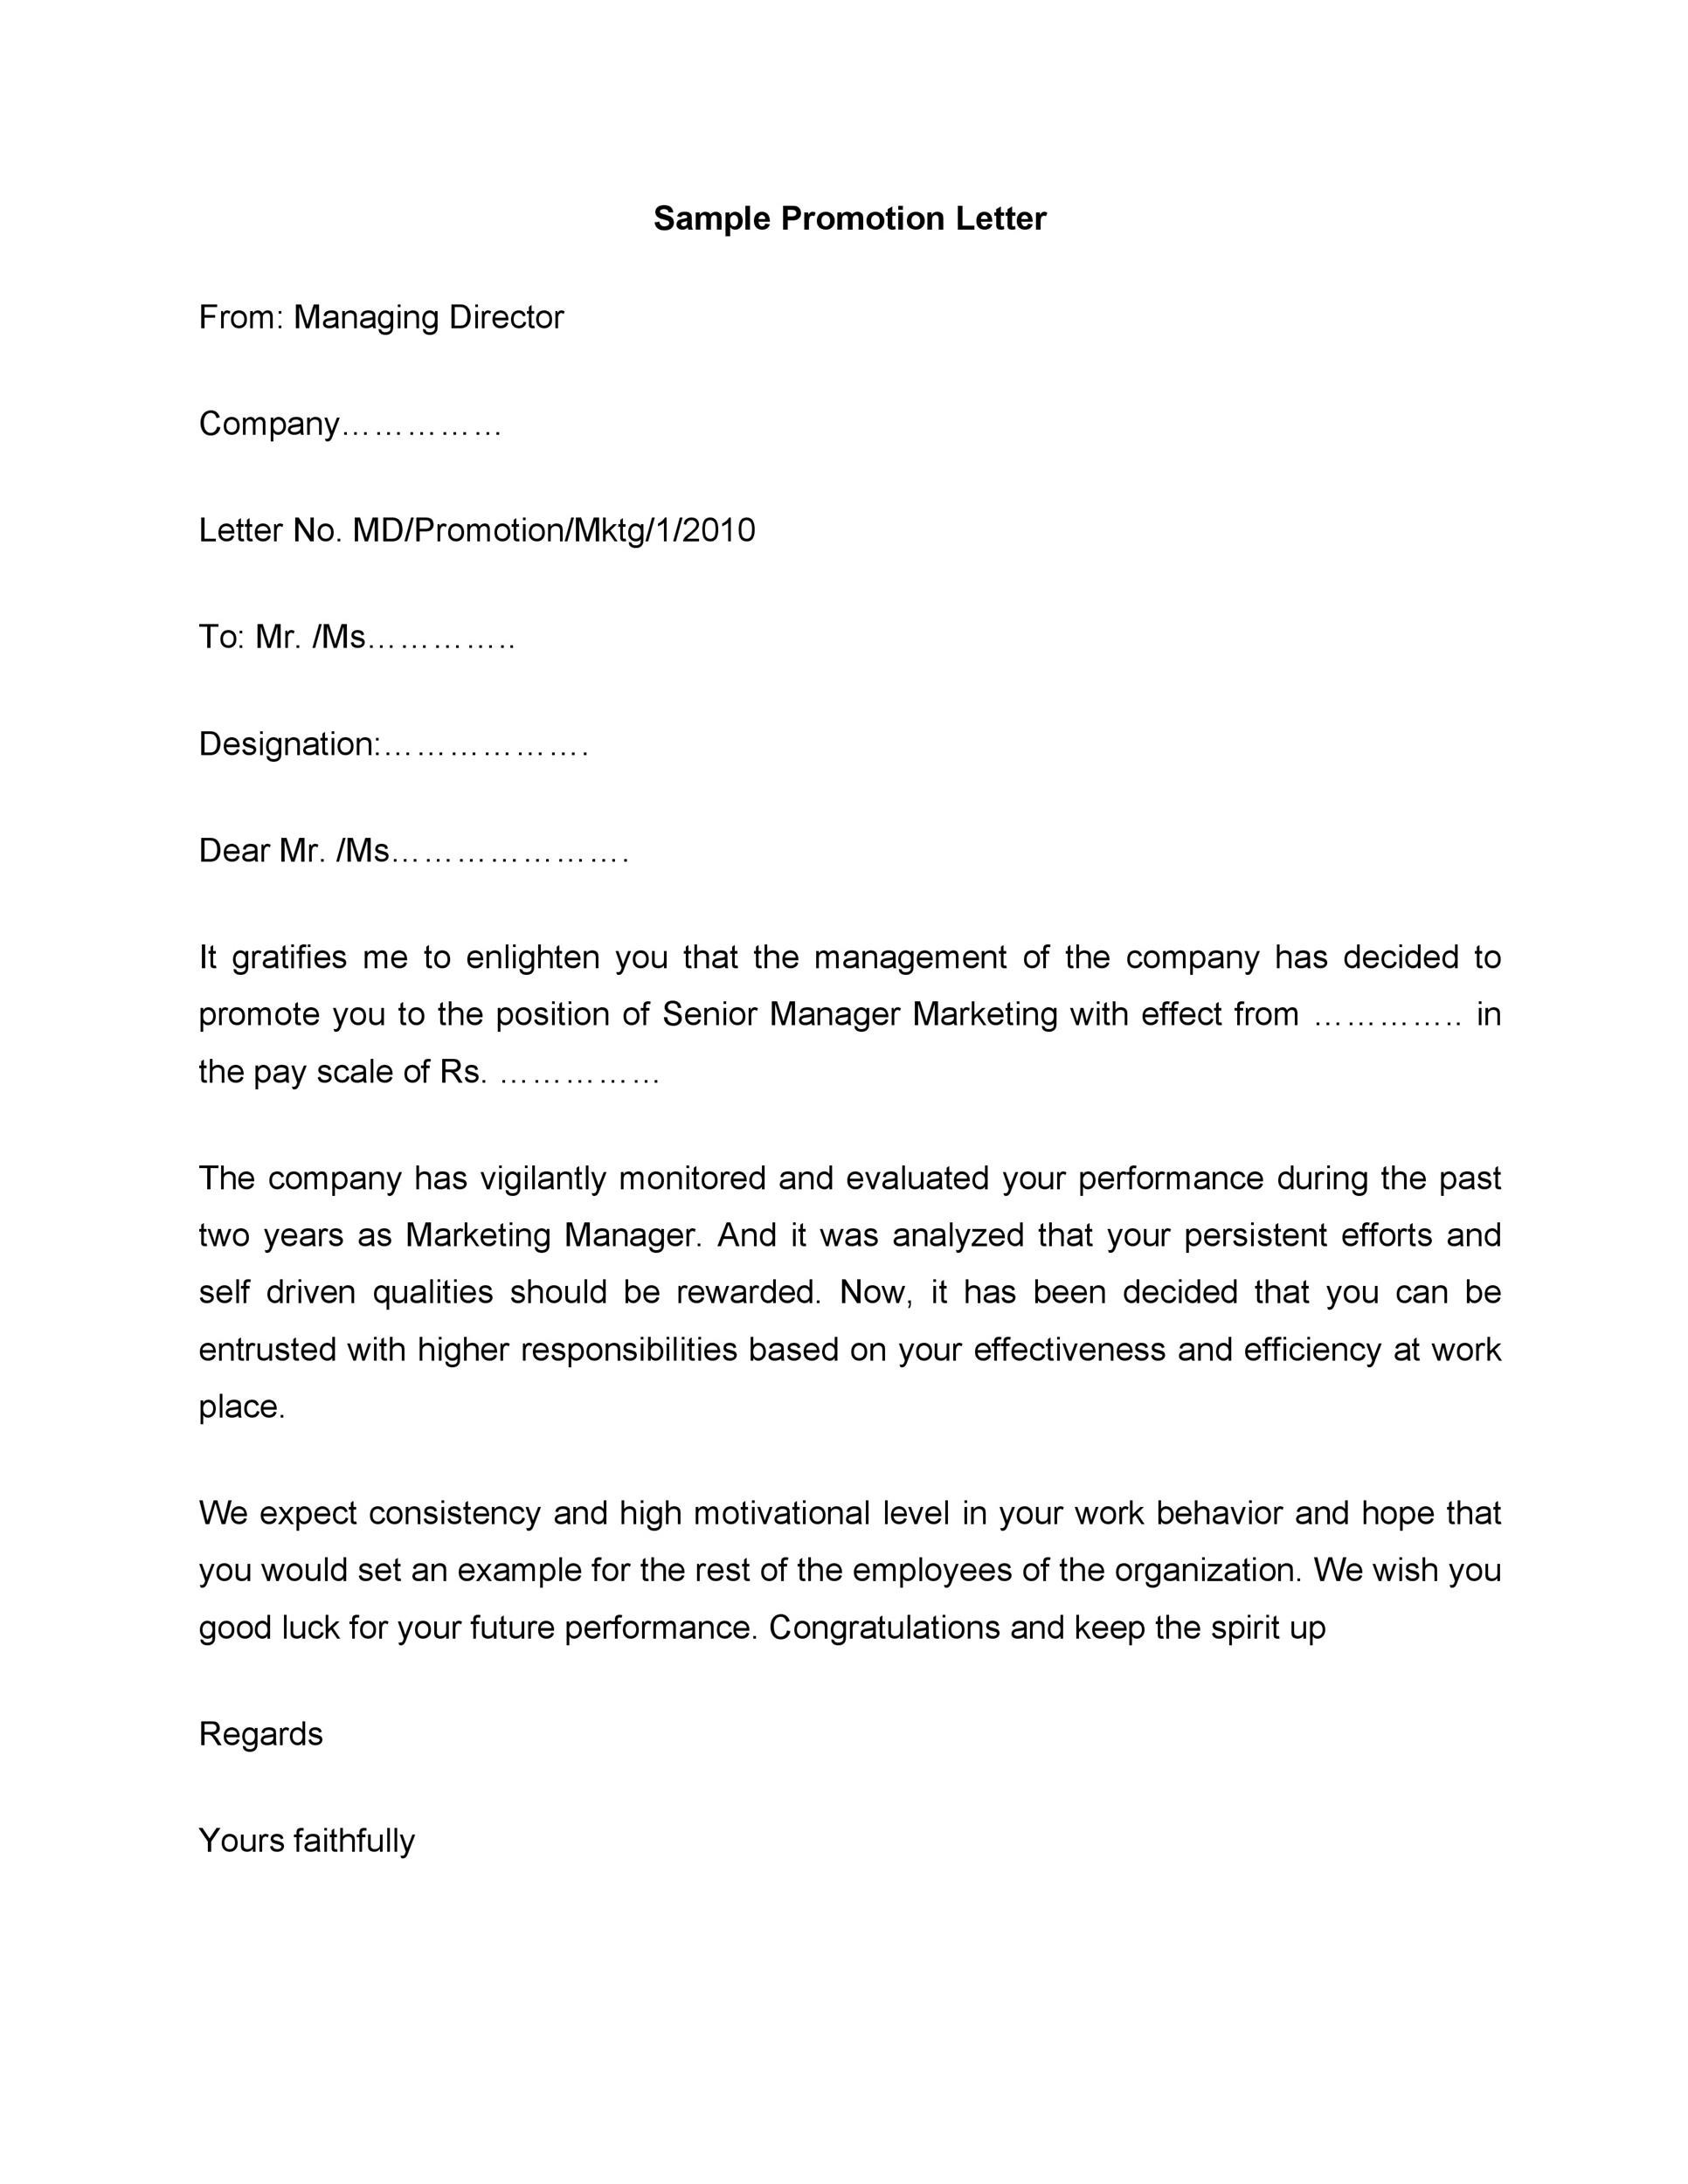 application letter for a promotion